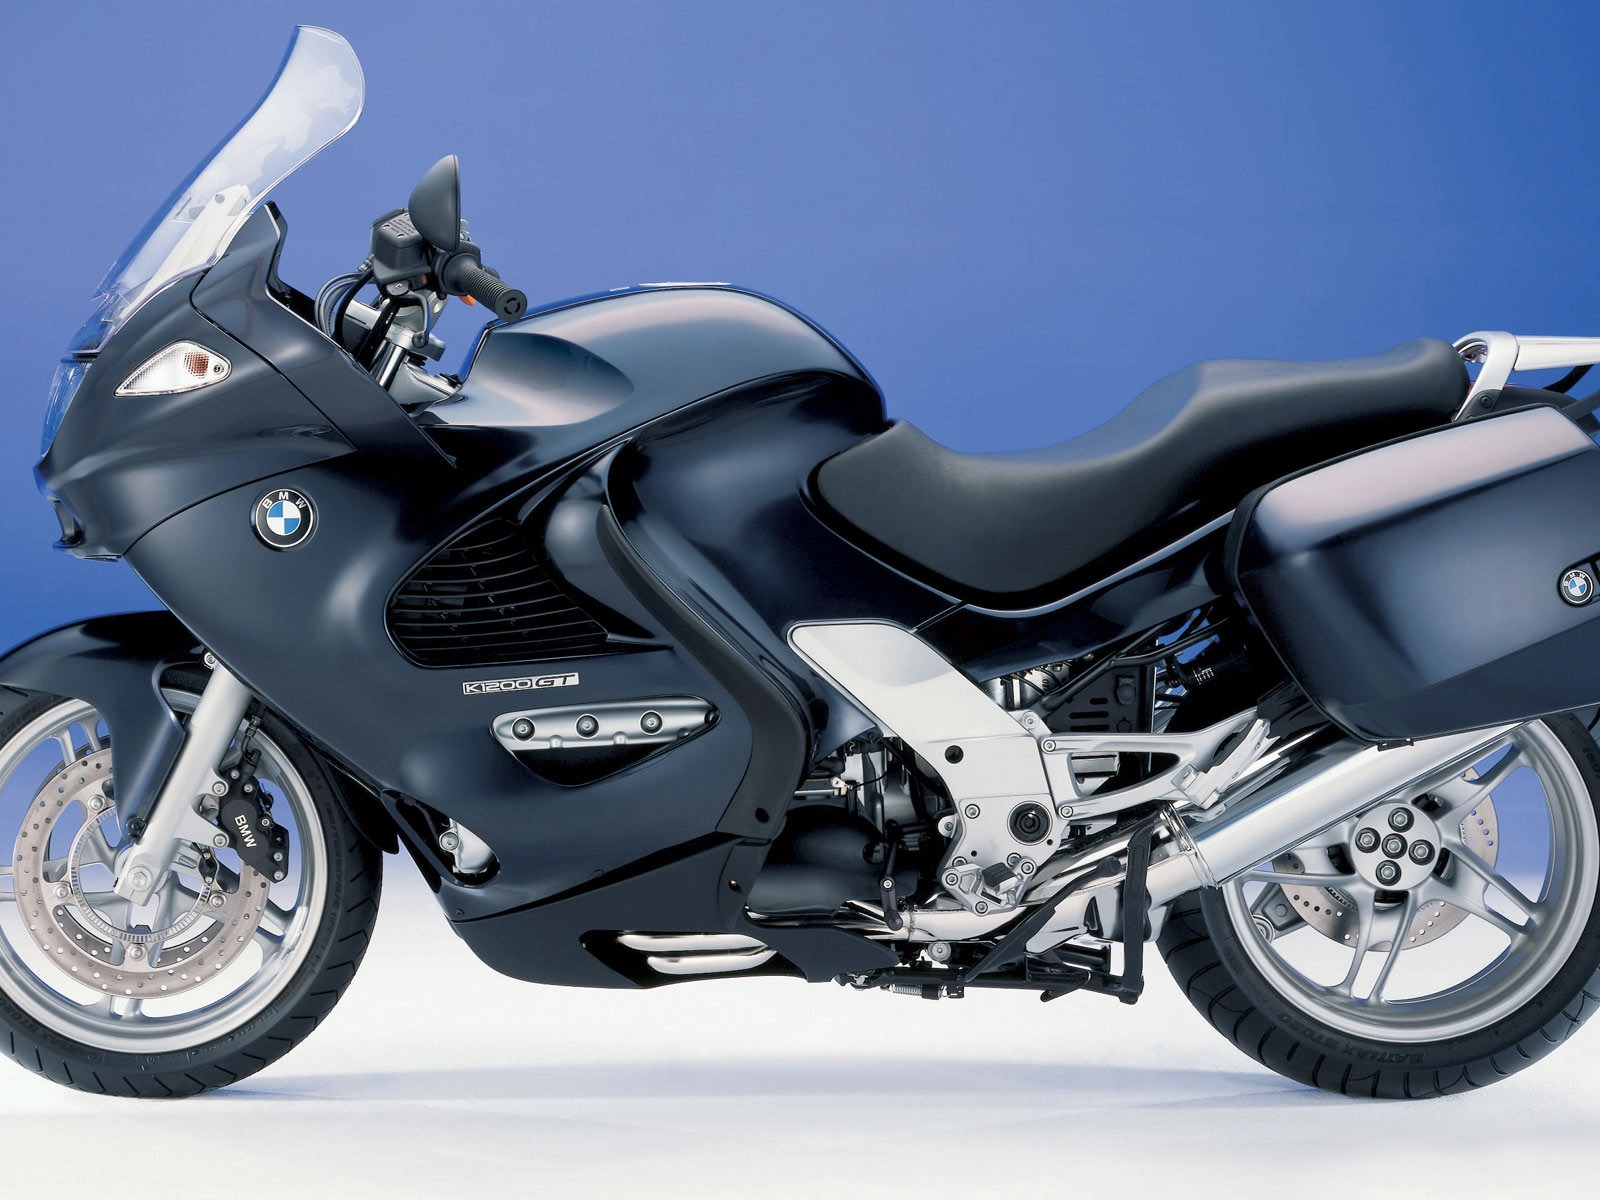 BMW motorcycle wallpapers (1) #20 - 1600x1200